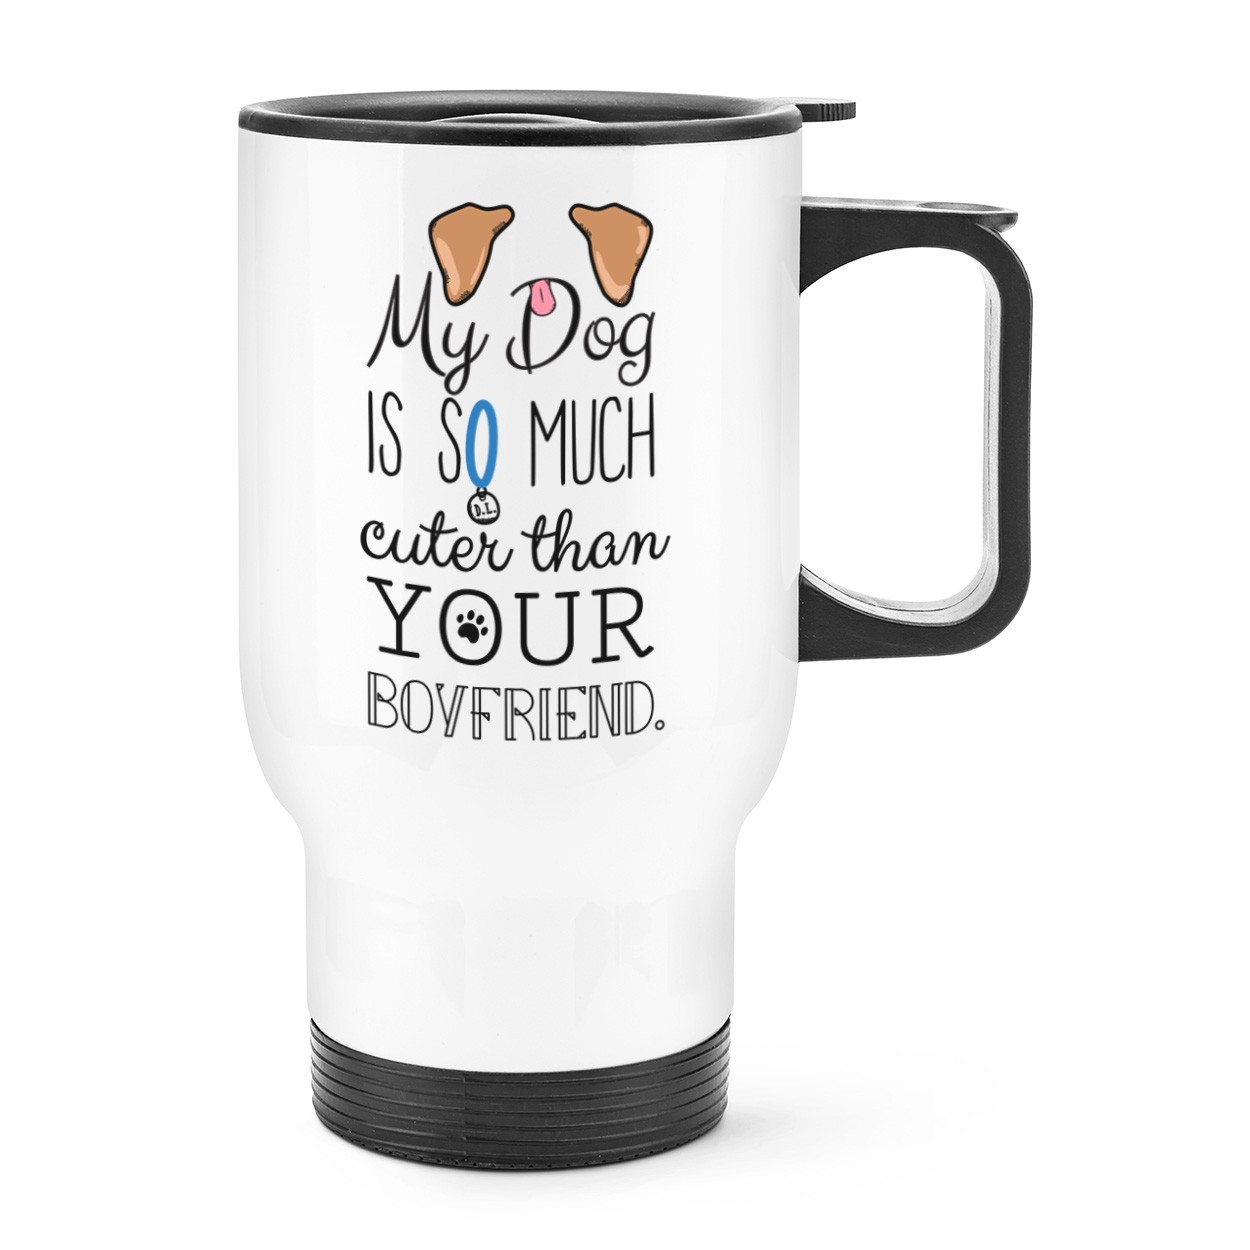 My Dog Is Cuter Than Your Boyfriend Brown Ears Travel Mug Cup With Handle